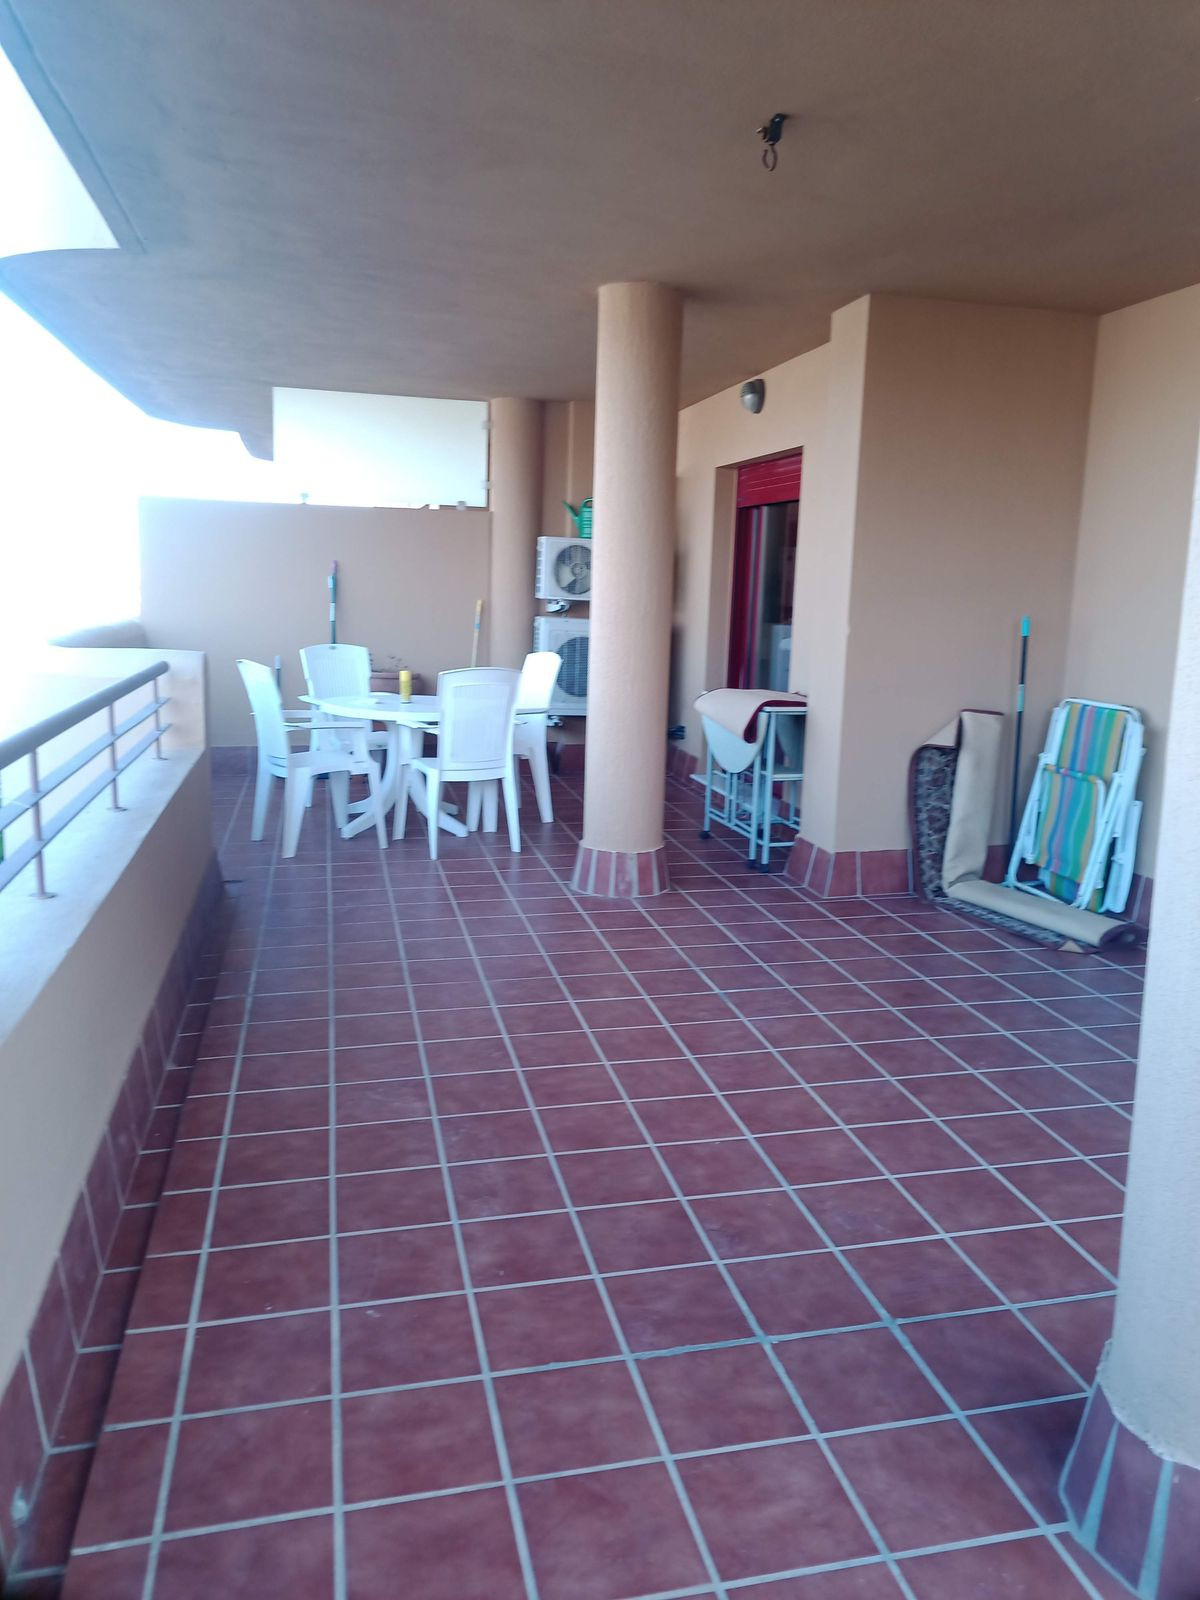 Nice apartment with large terrace for sale in La cala de Mijas, less than 500mts walk to the beach. , Spain